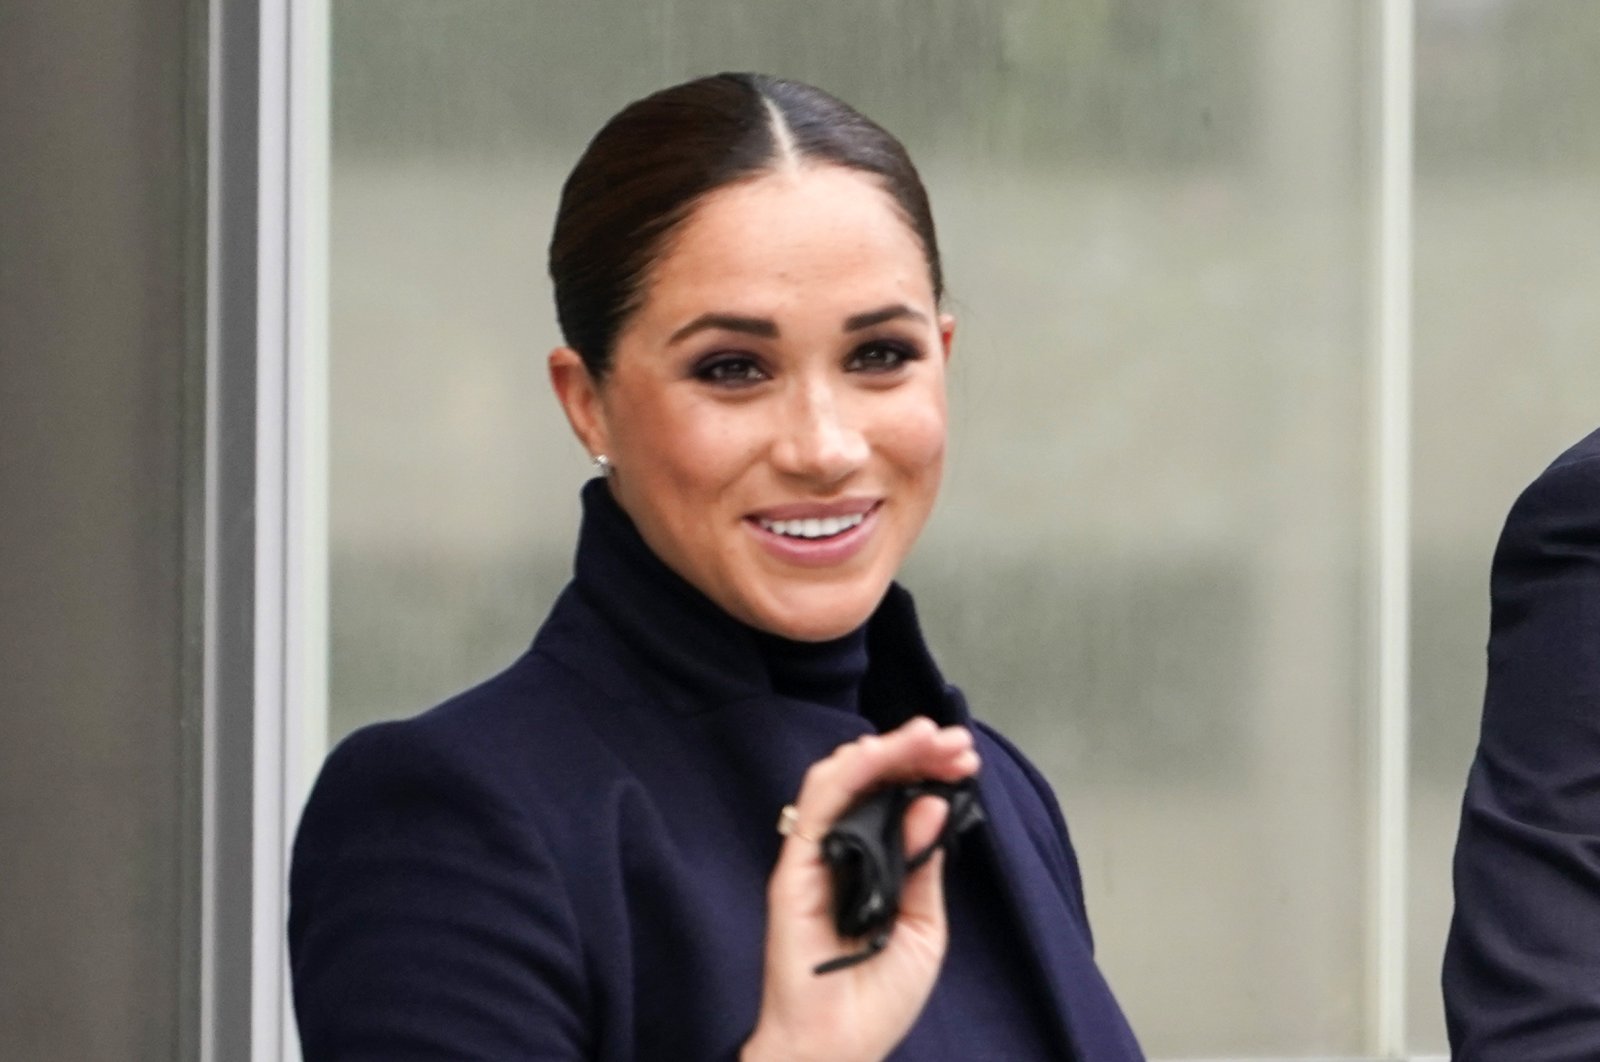 Meghan Markle, the Duchess of Sussex, appears at the National September 11 Memorial &amp; Museum in New York, U.S., Sept. 23, 2021. (AP Photo)